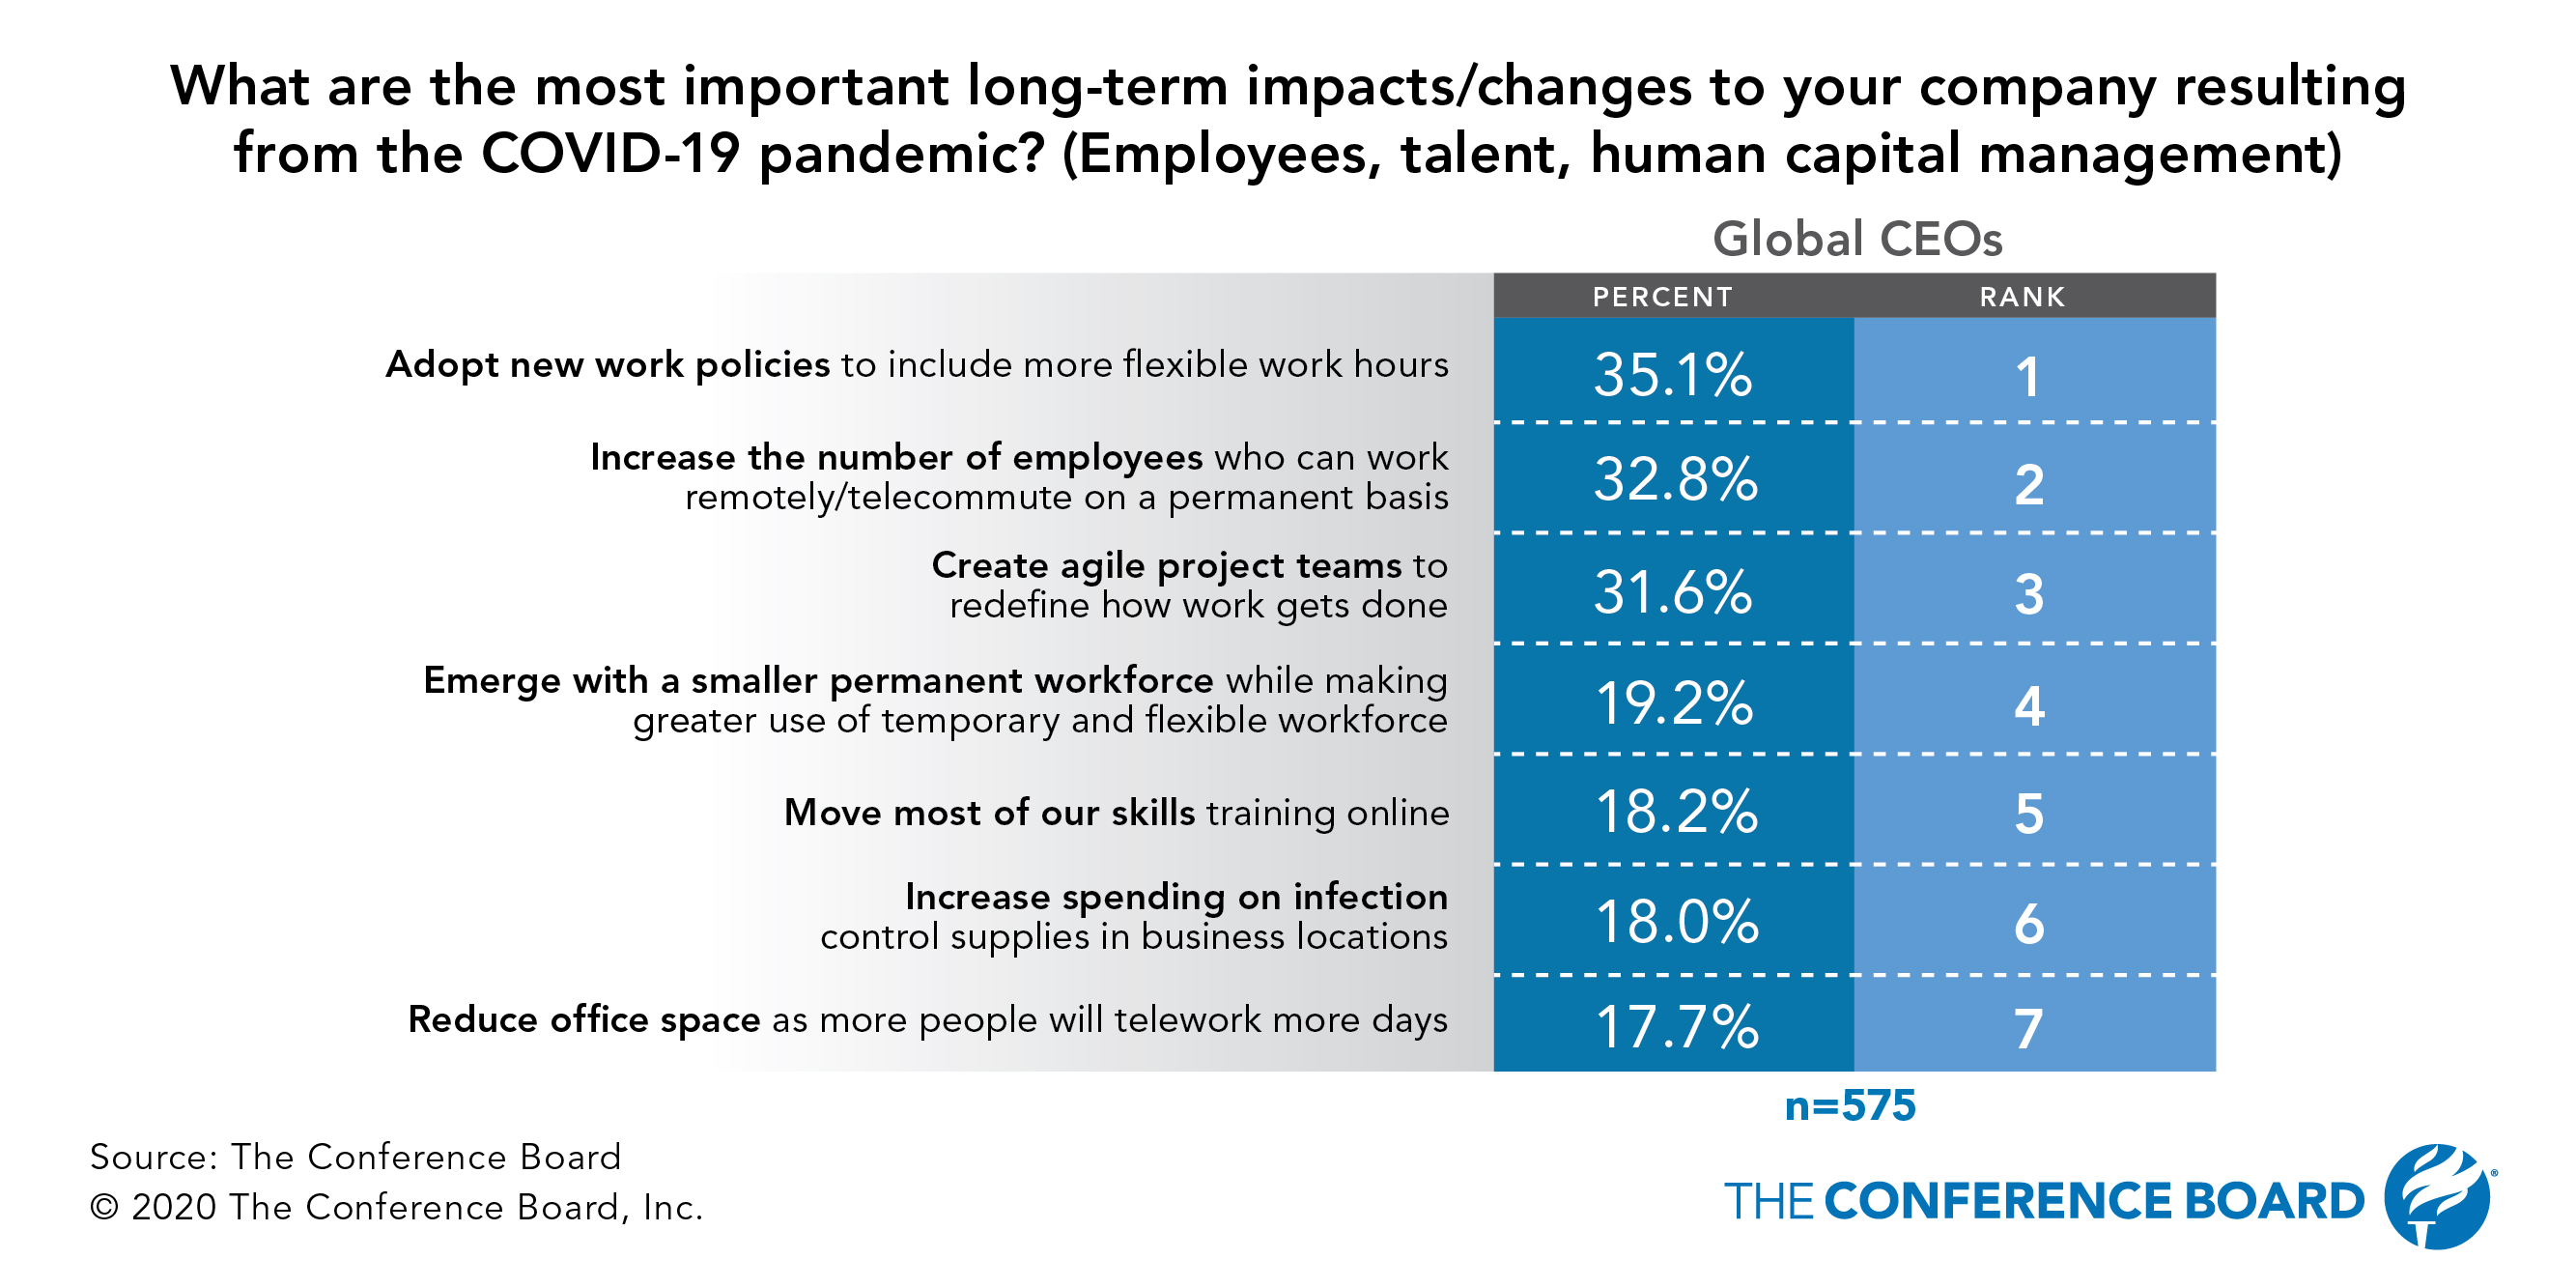 COVID-19's long-term impact on the workforce: more flexible hours and remote work